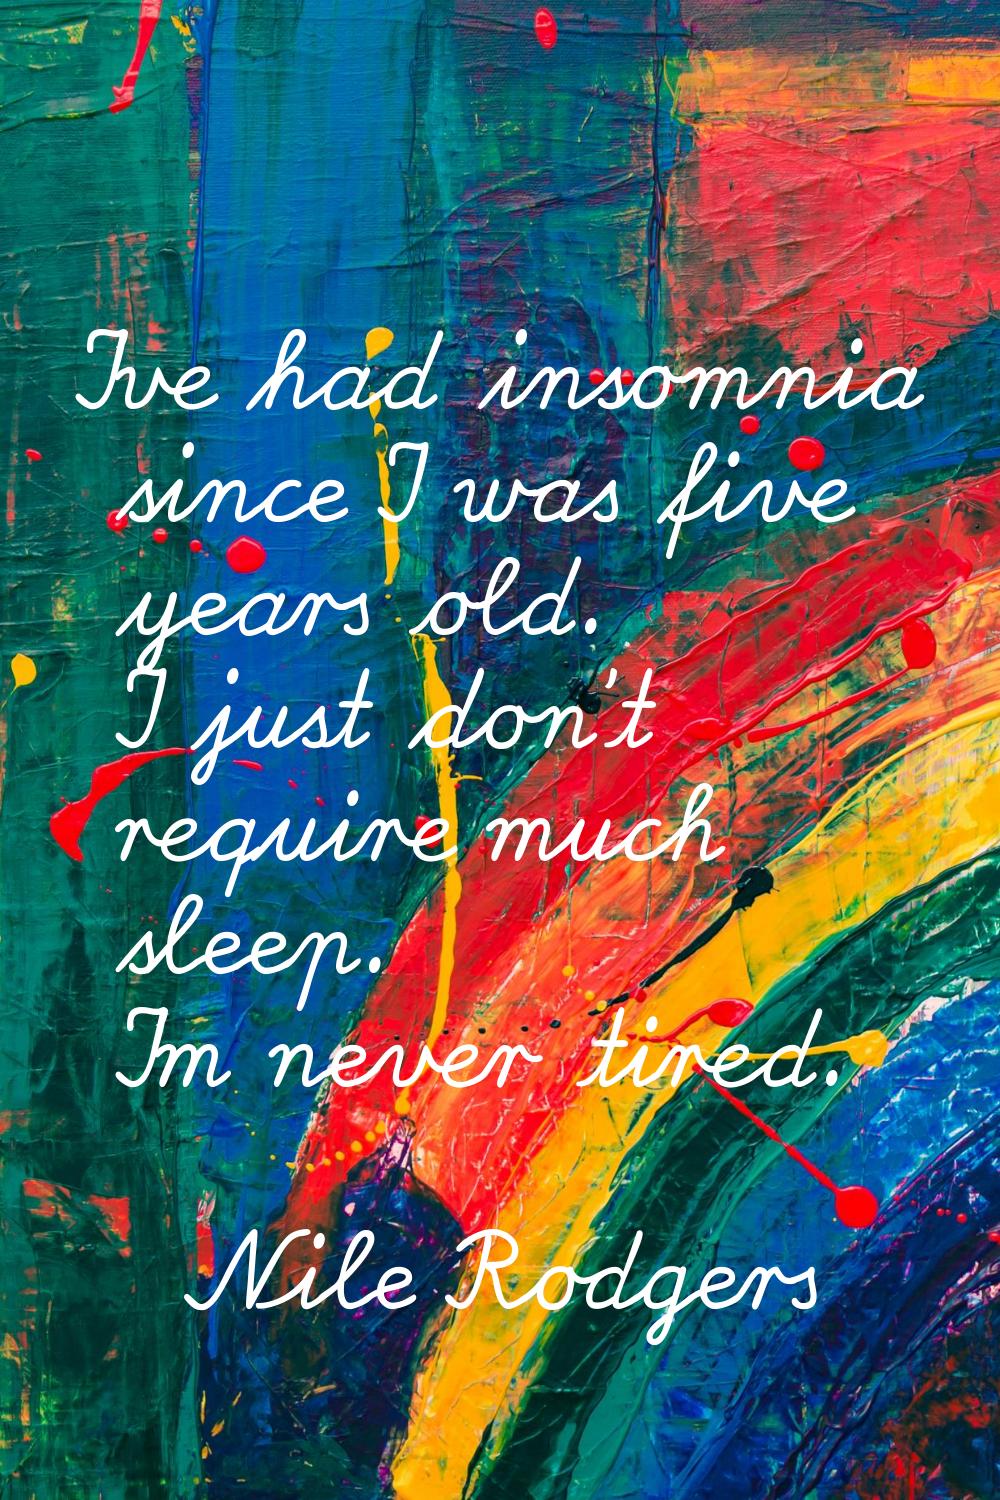 I've had insomnia since I was five years old. I just don't require much sleep. I'm never tired.